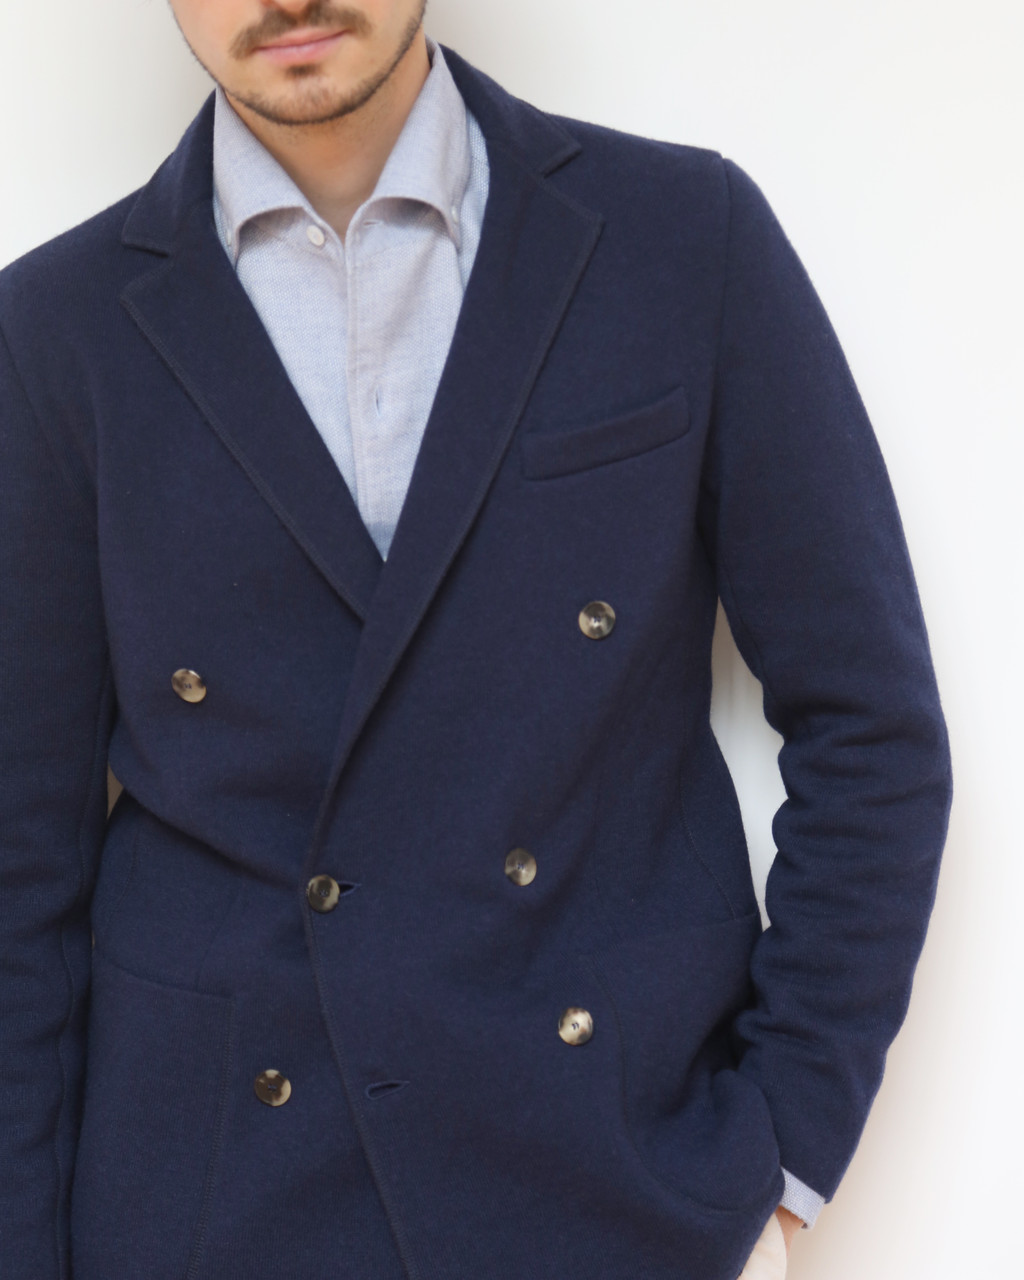 Blue Knitted Jacket – Wool And Cashmere – Made in Italy